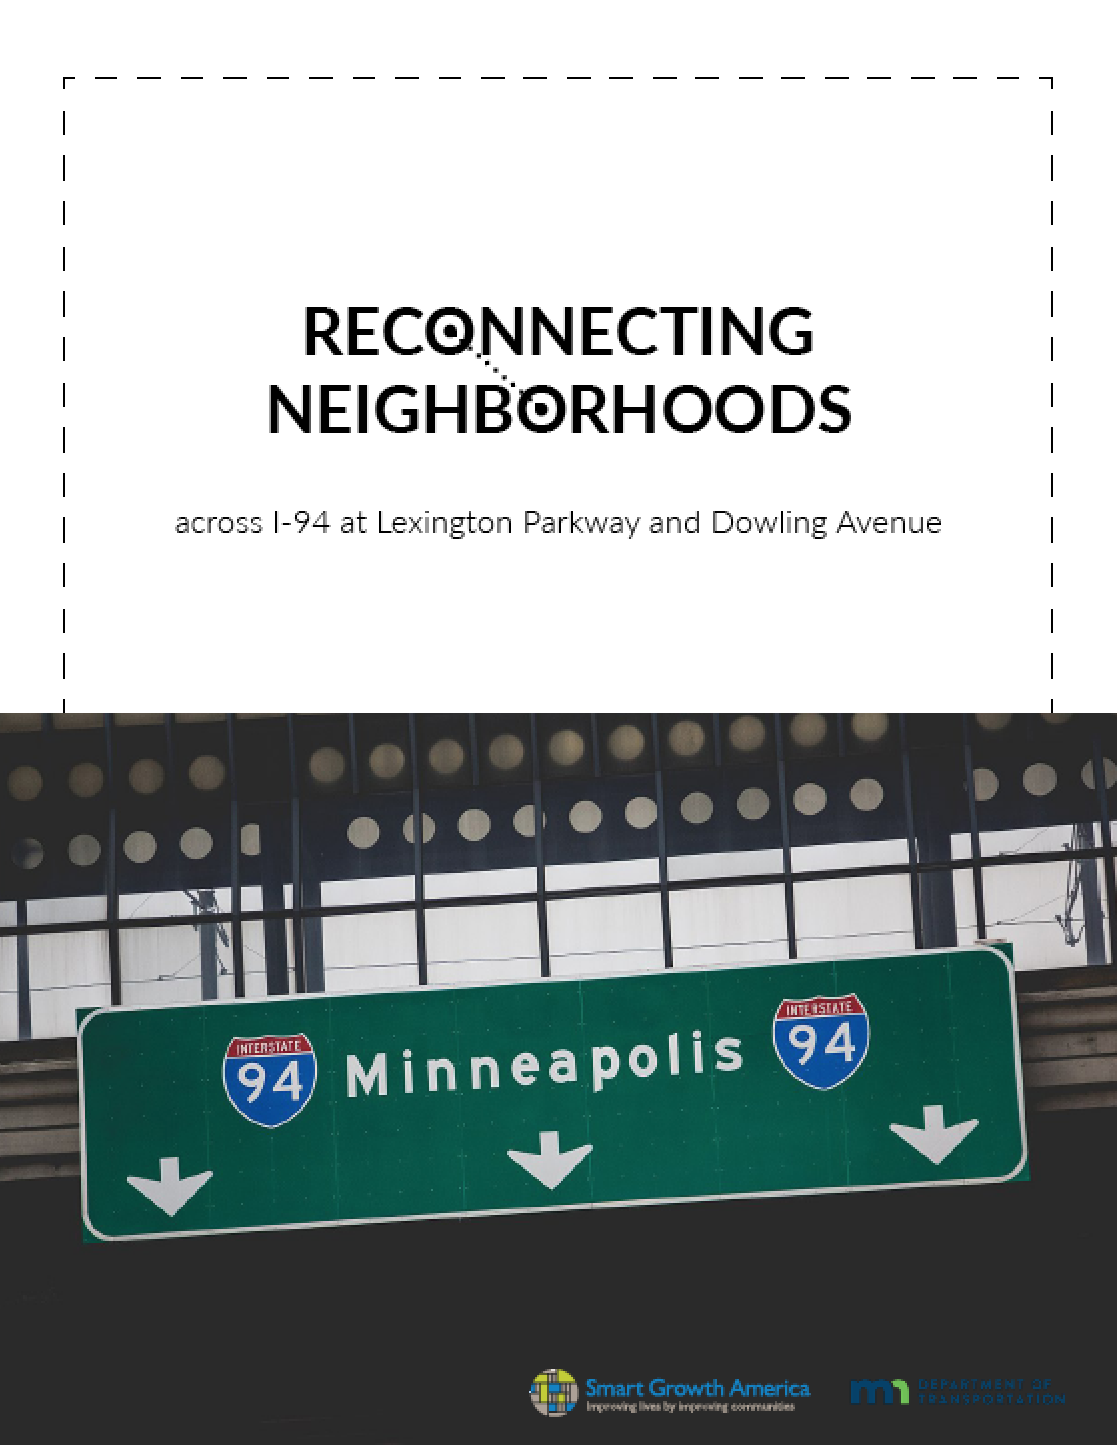 Reconnecting Neighborhoods across I-94 at Lexington Parkway and Dowling Avenue